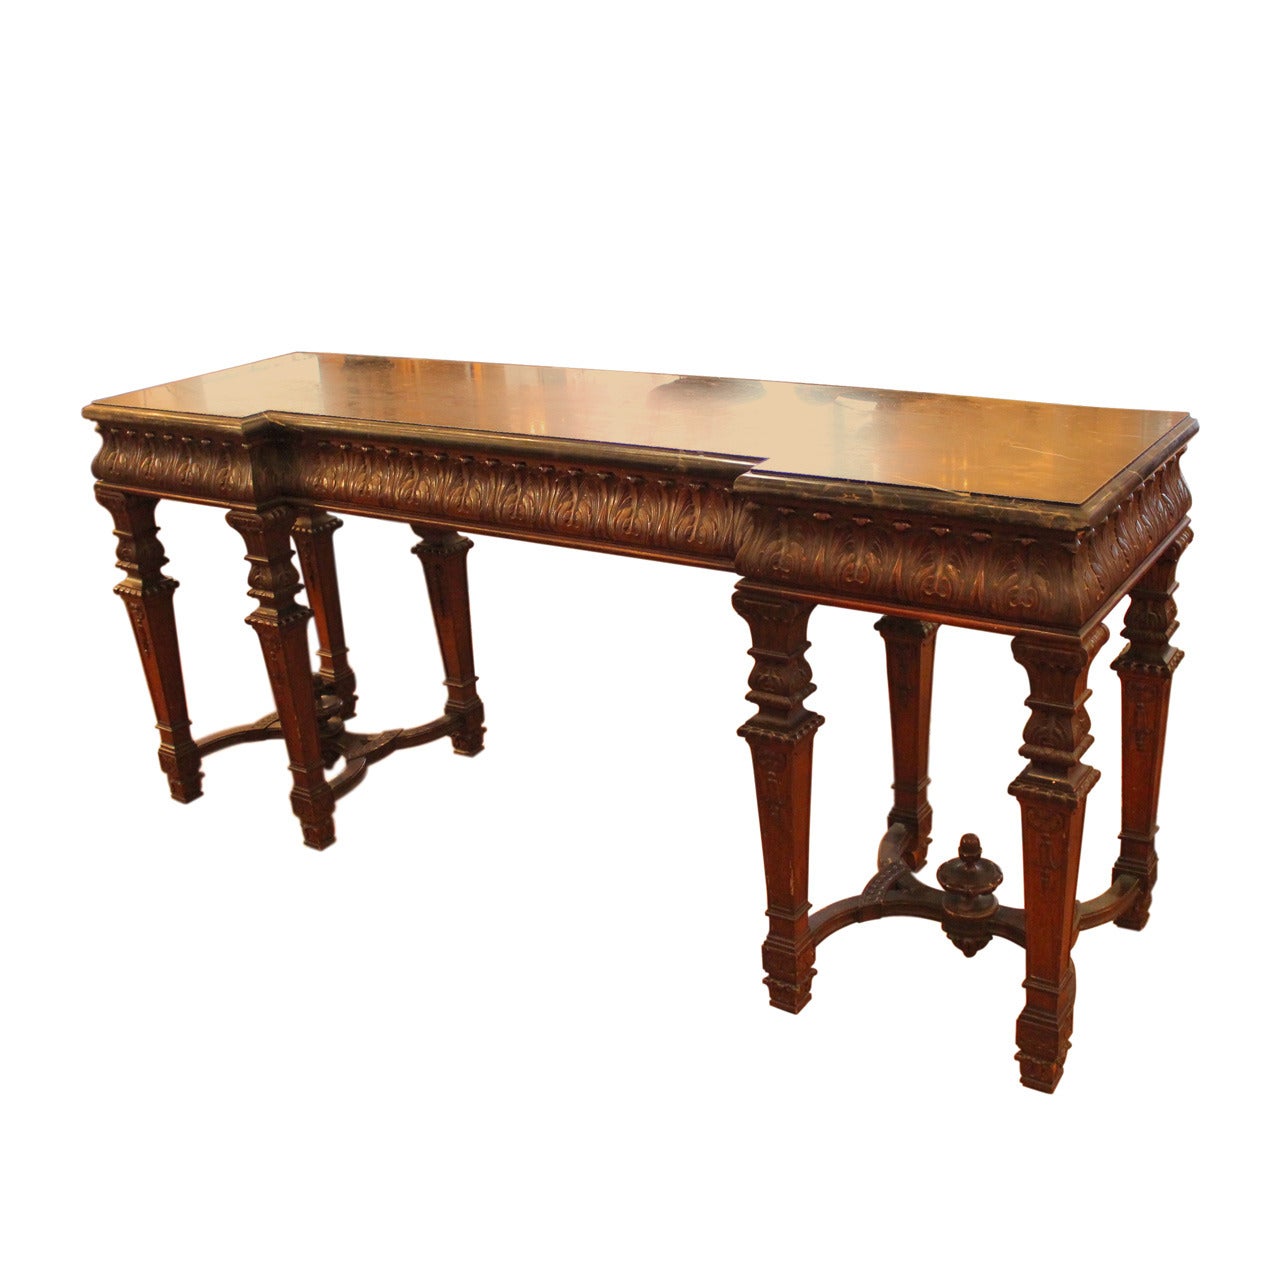 19th Century Heavily Carved Wood Console Table with Marble Top